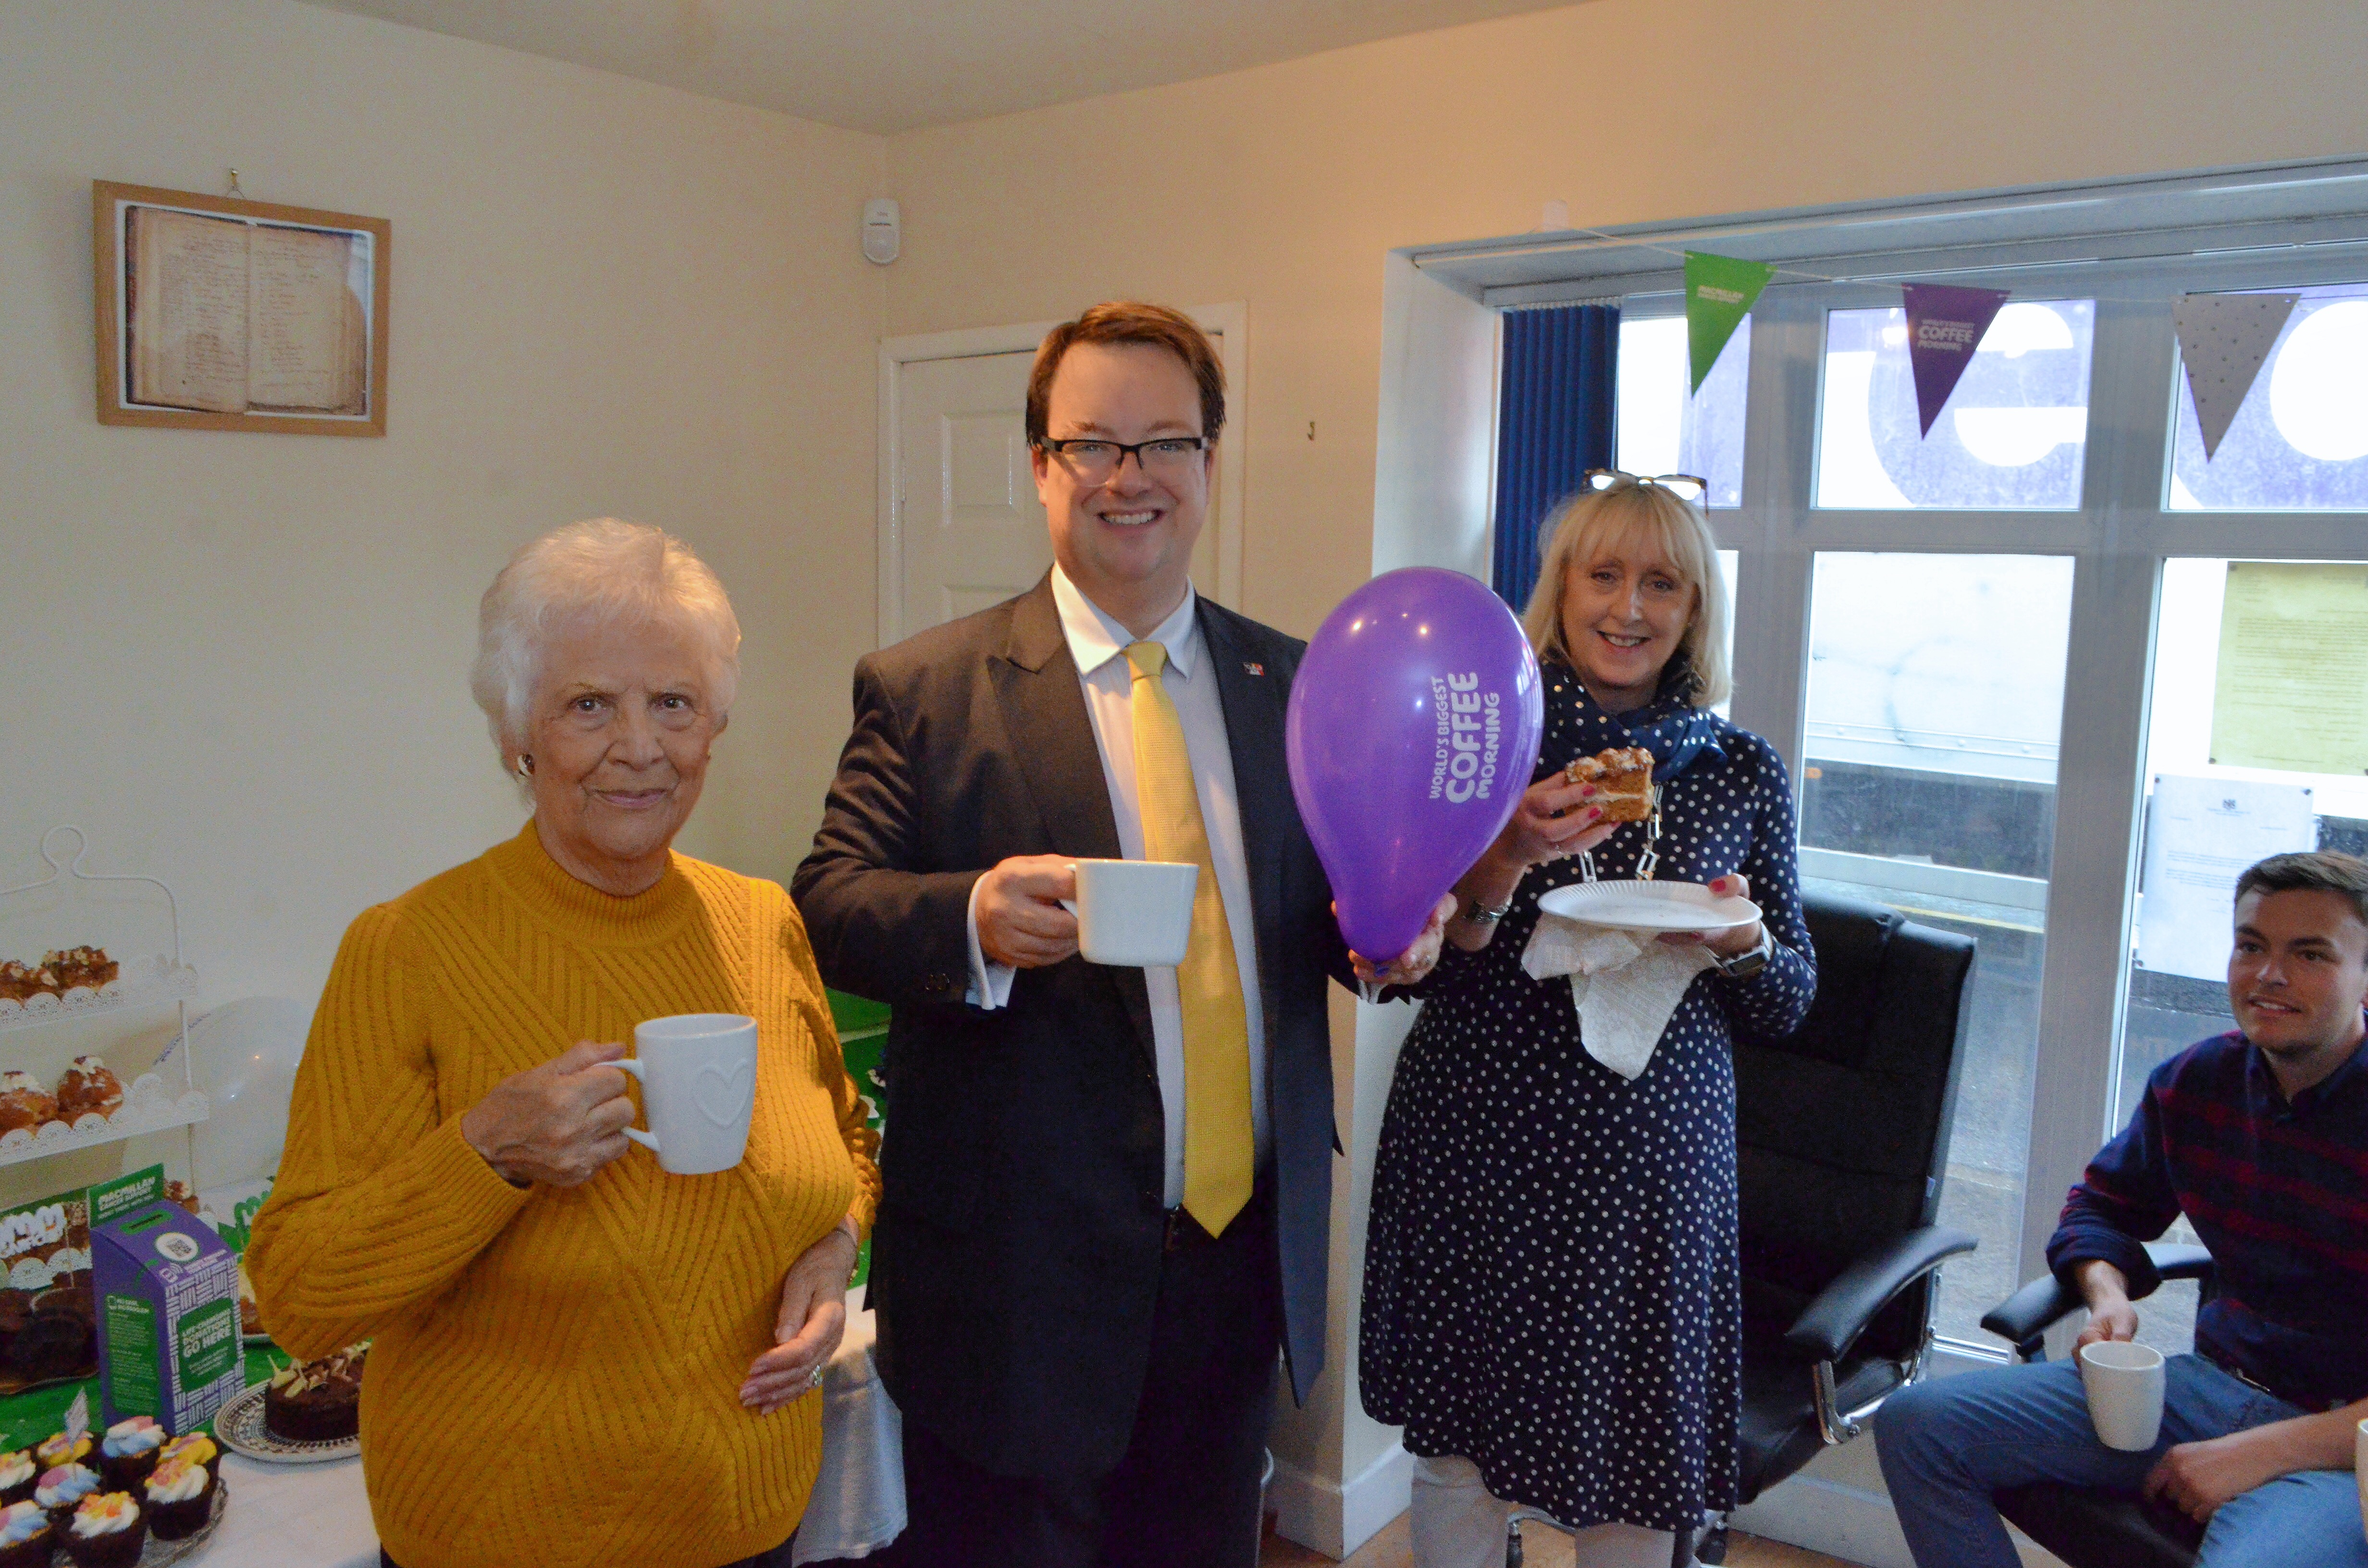 Mike holds a coffee morning for Macmillan Cancer Support at his office in Wordsley